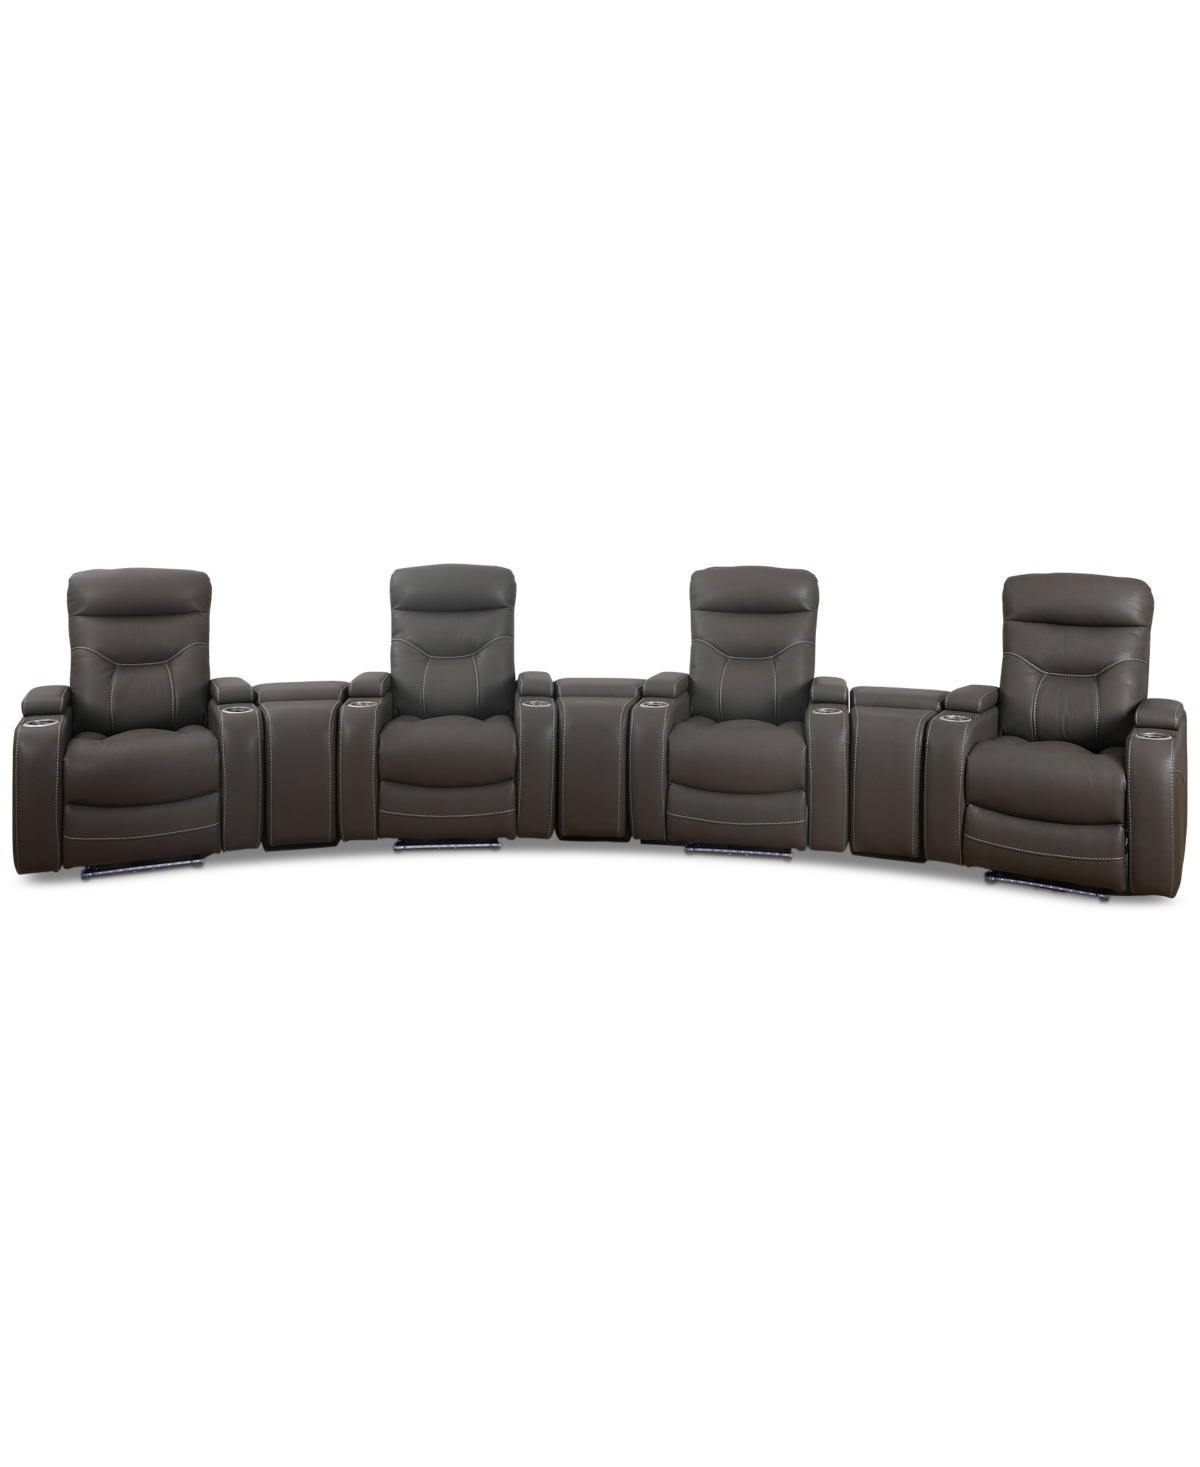 Furniture Jabarr 7-pc. Beyond Leather Theater Seating With 3 Consoles, Created For Macy's In Grey